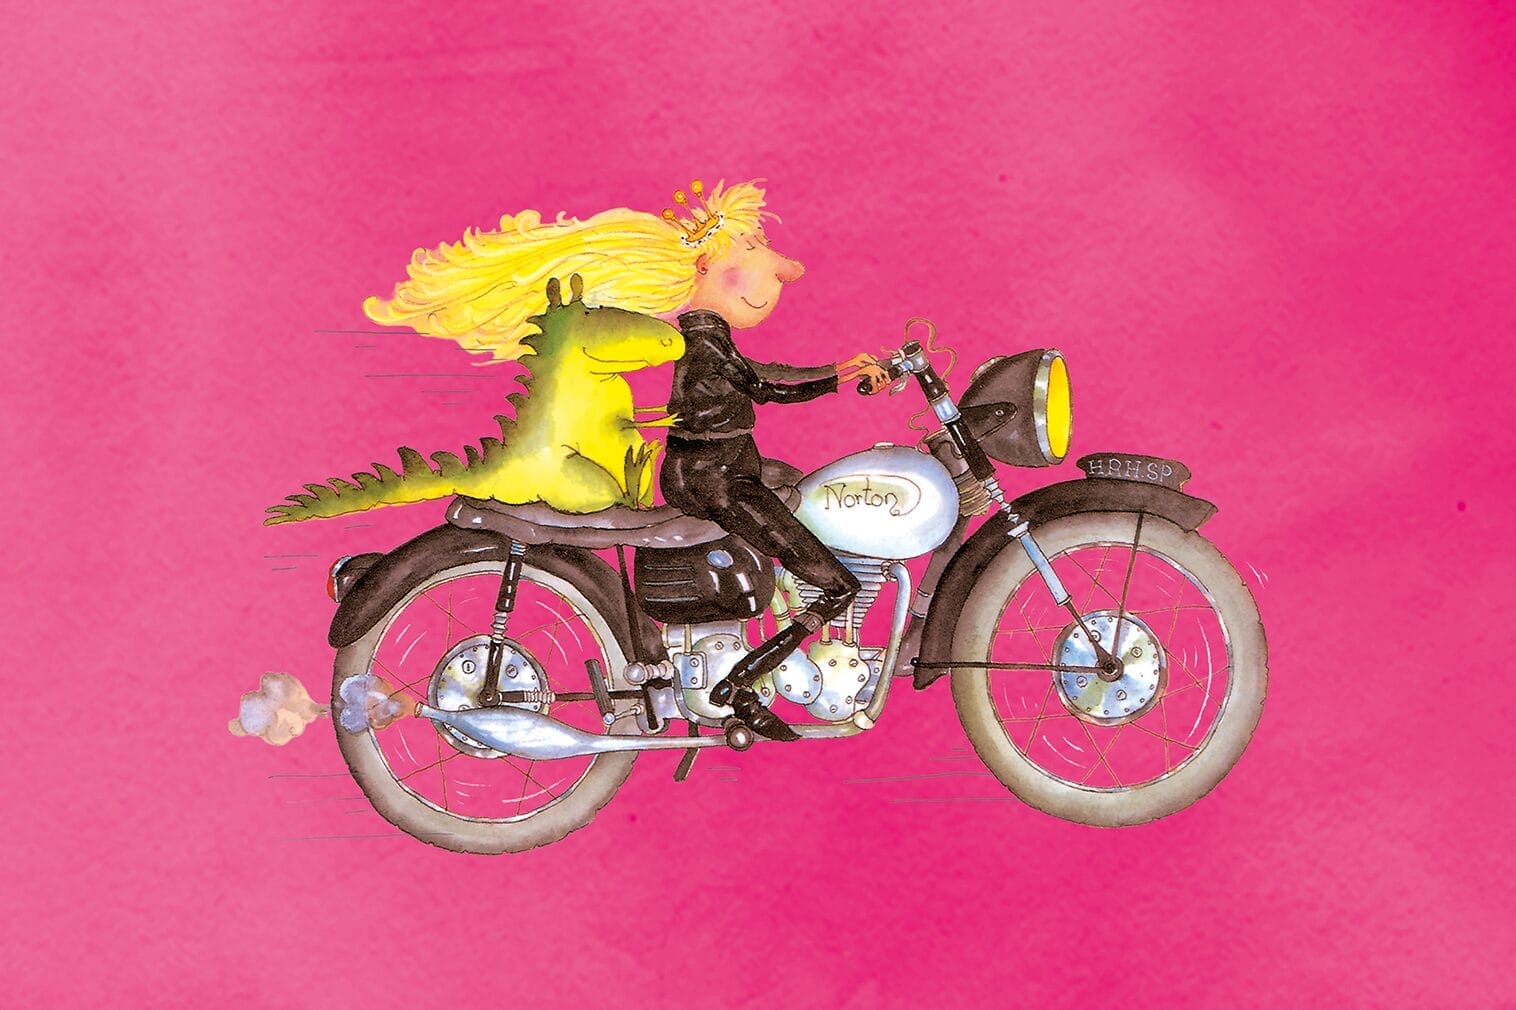 A blonde cartoon princess wears a groovy leather outfit as she rides a motorbike, with a chunky green dragon on the backseat. The background is vibrant pink.